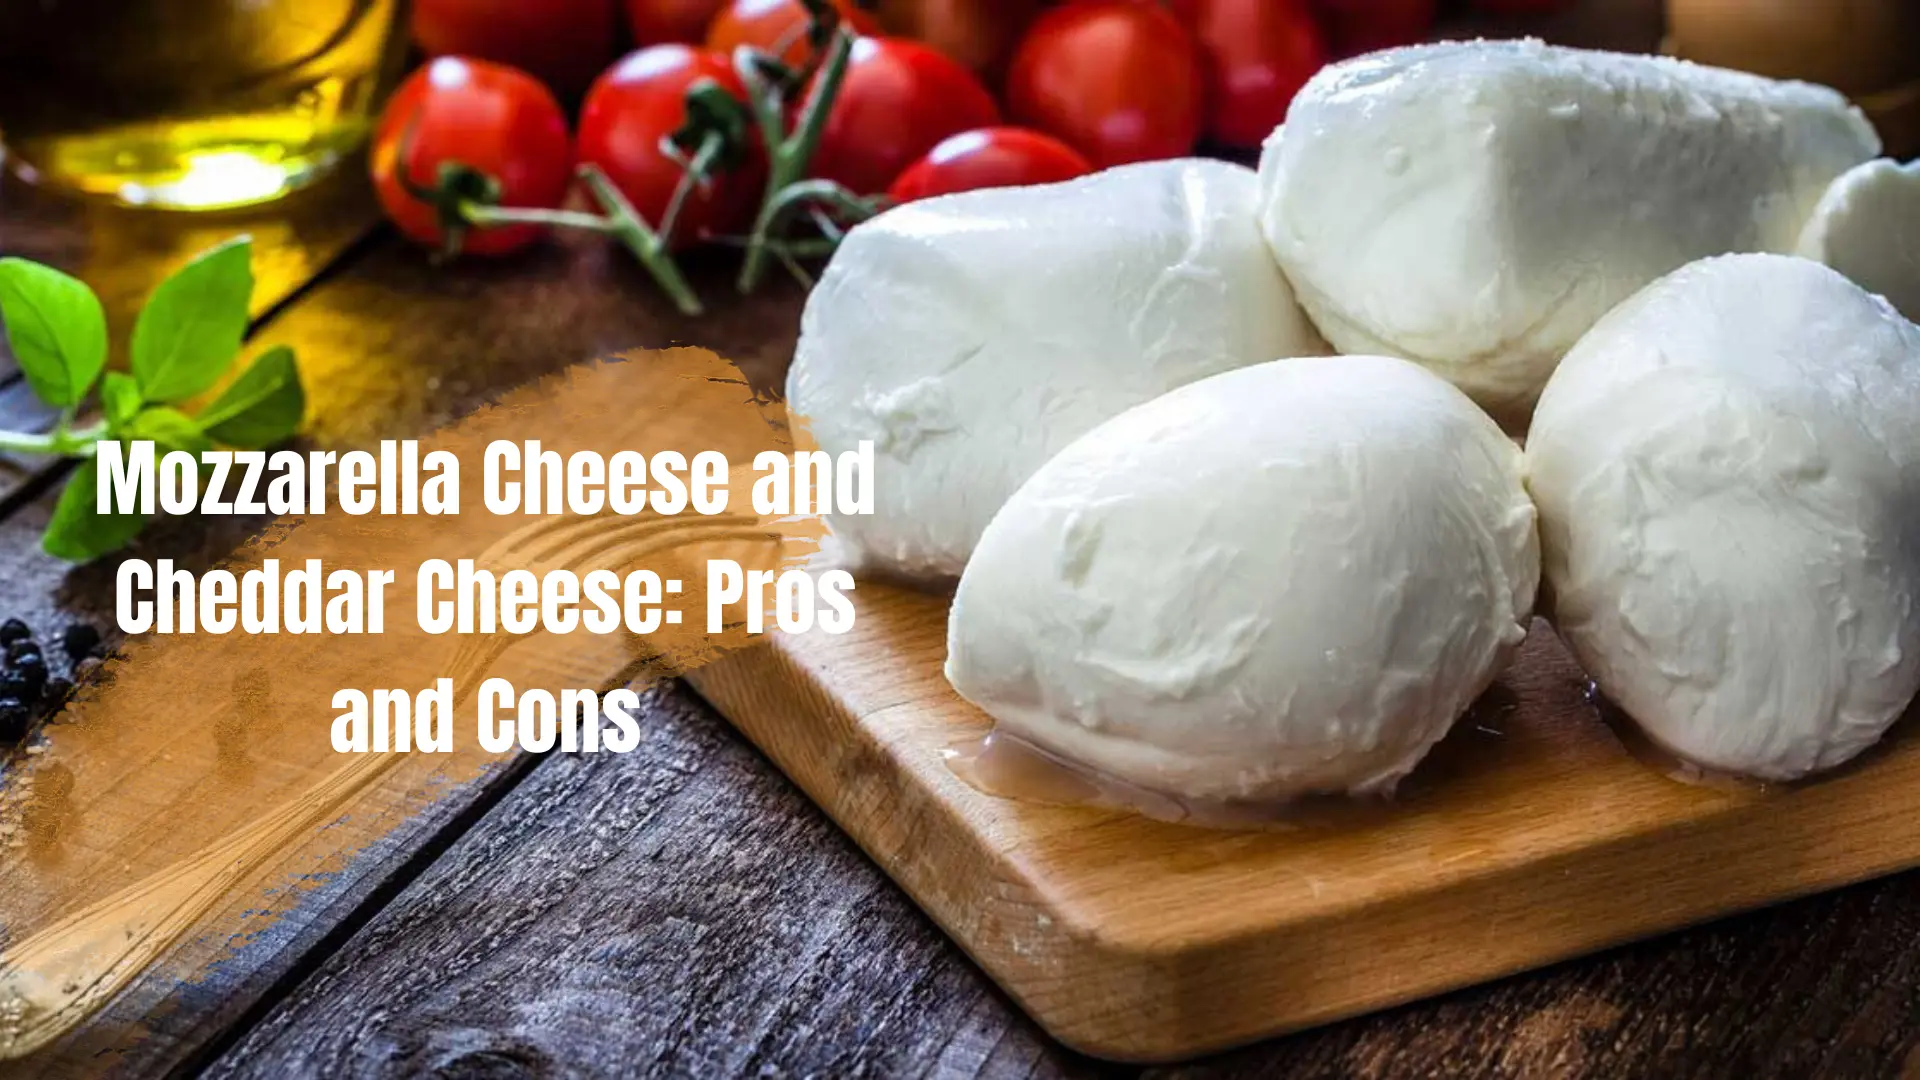 Mozzarella-Cheese-and-Cheddar-Cheese-Pros-and-Cons